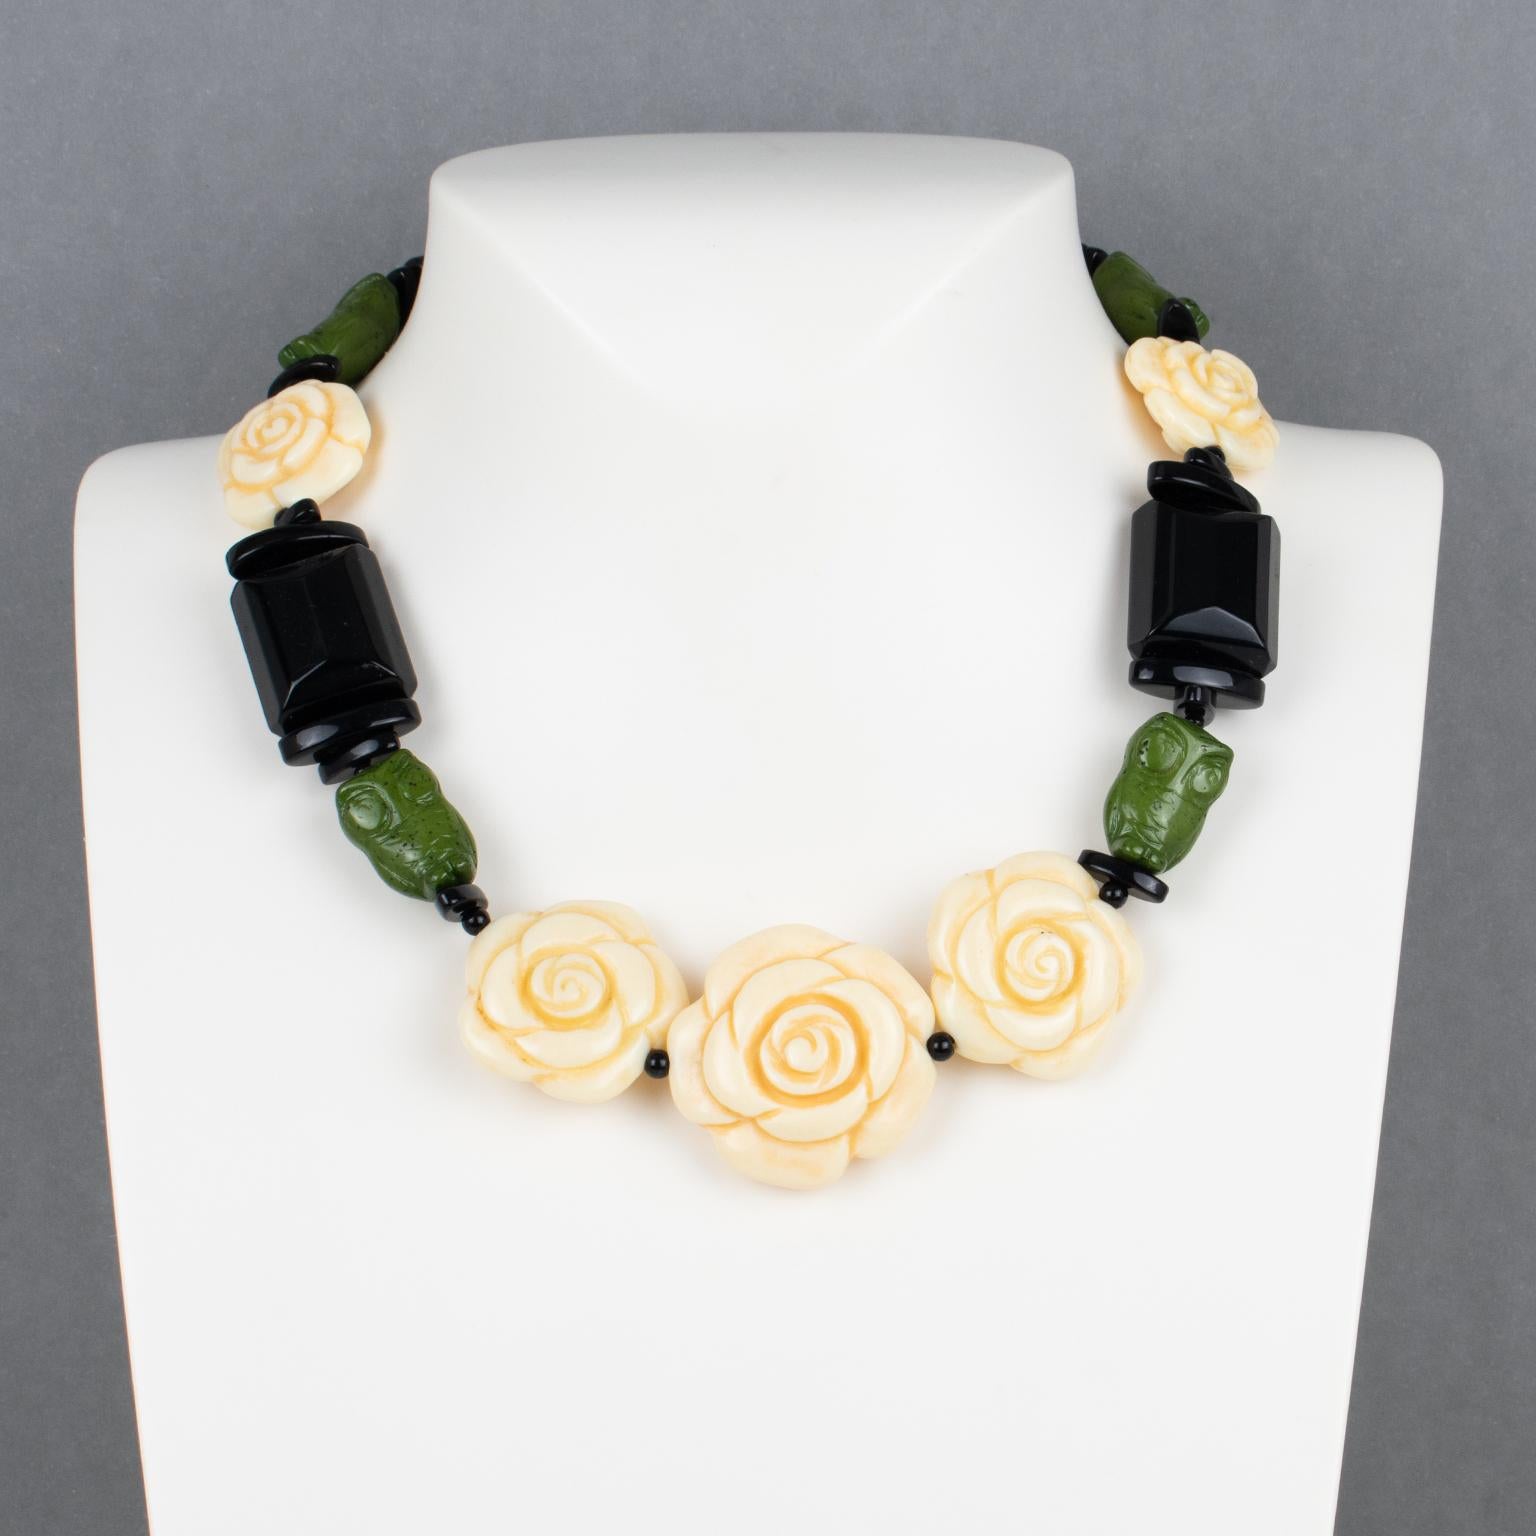 Modern Angela Caputi Black, Green and Ivory Resin Choker Necklace Flowers and Owls For Sale